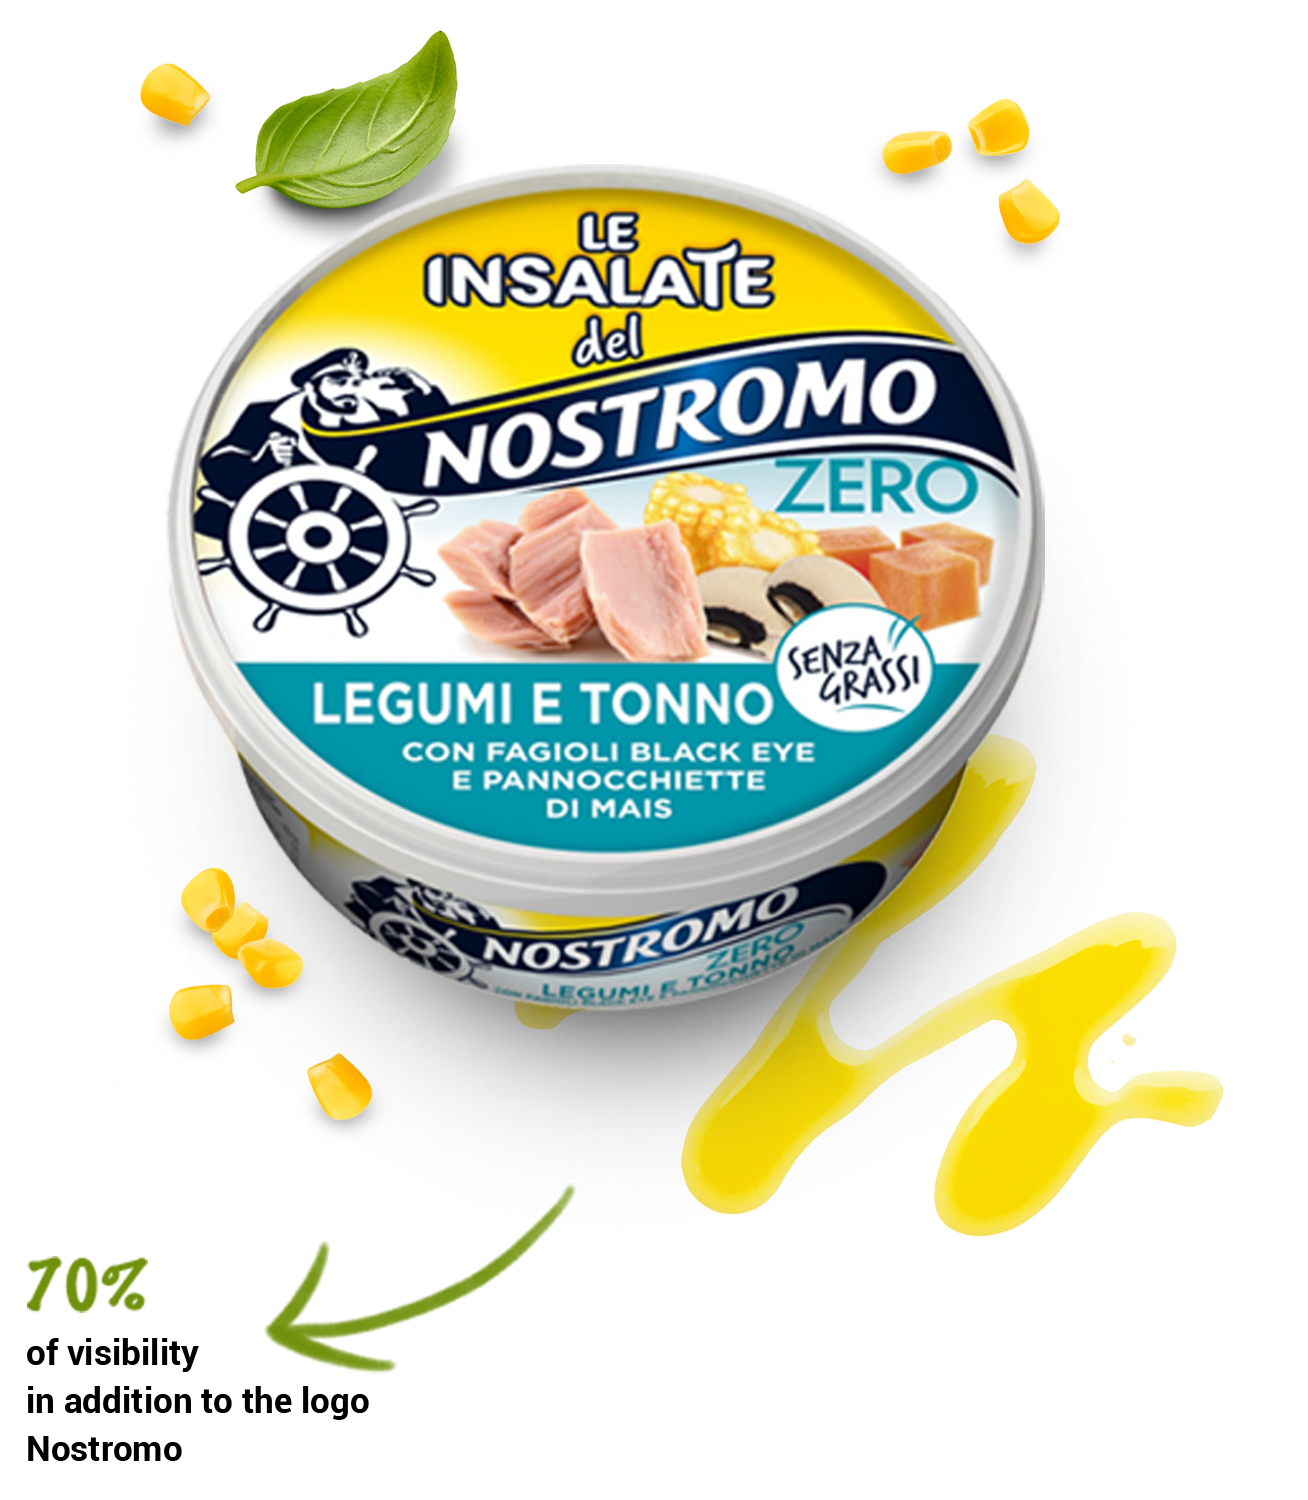 Visual Art Group - Nostromo, The salads of the Nostromo, packaging